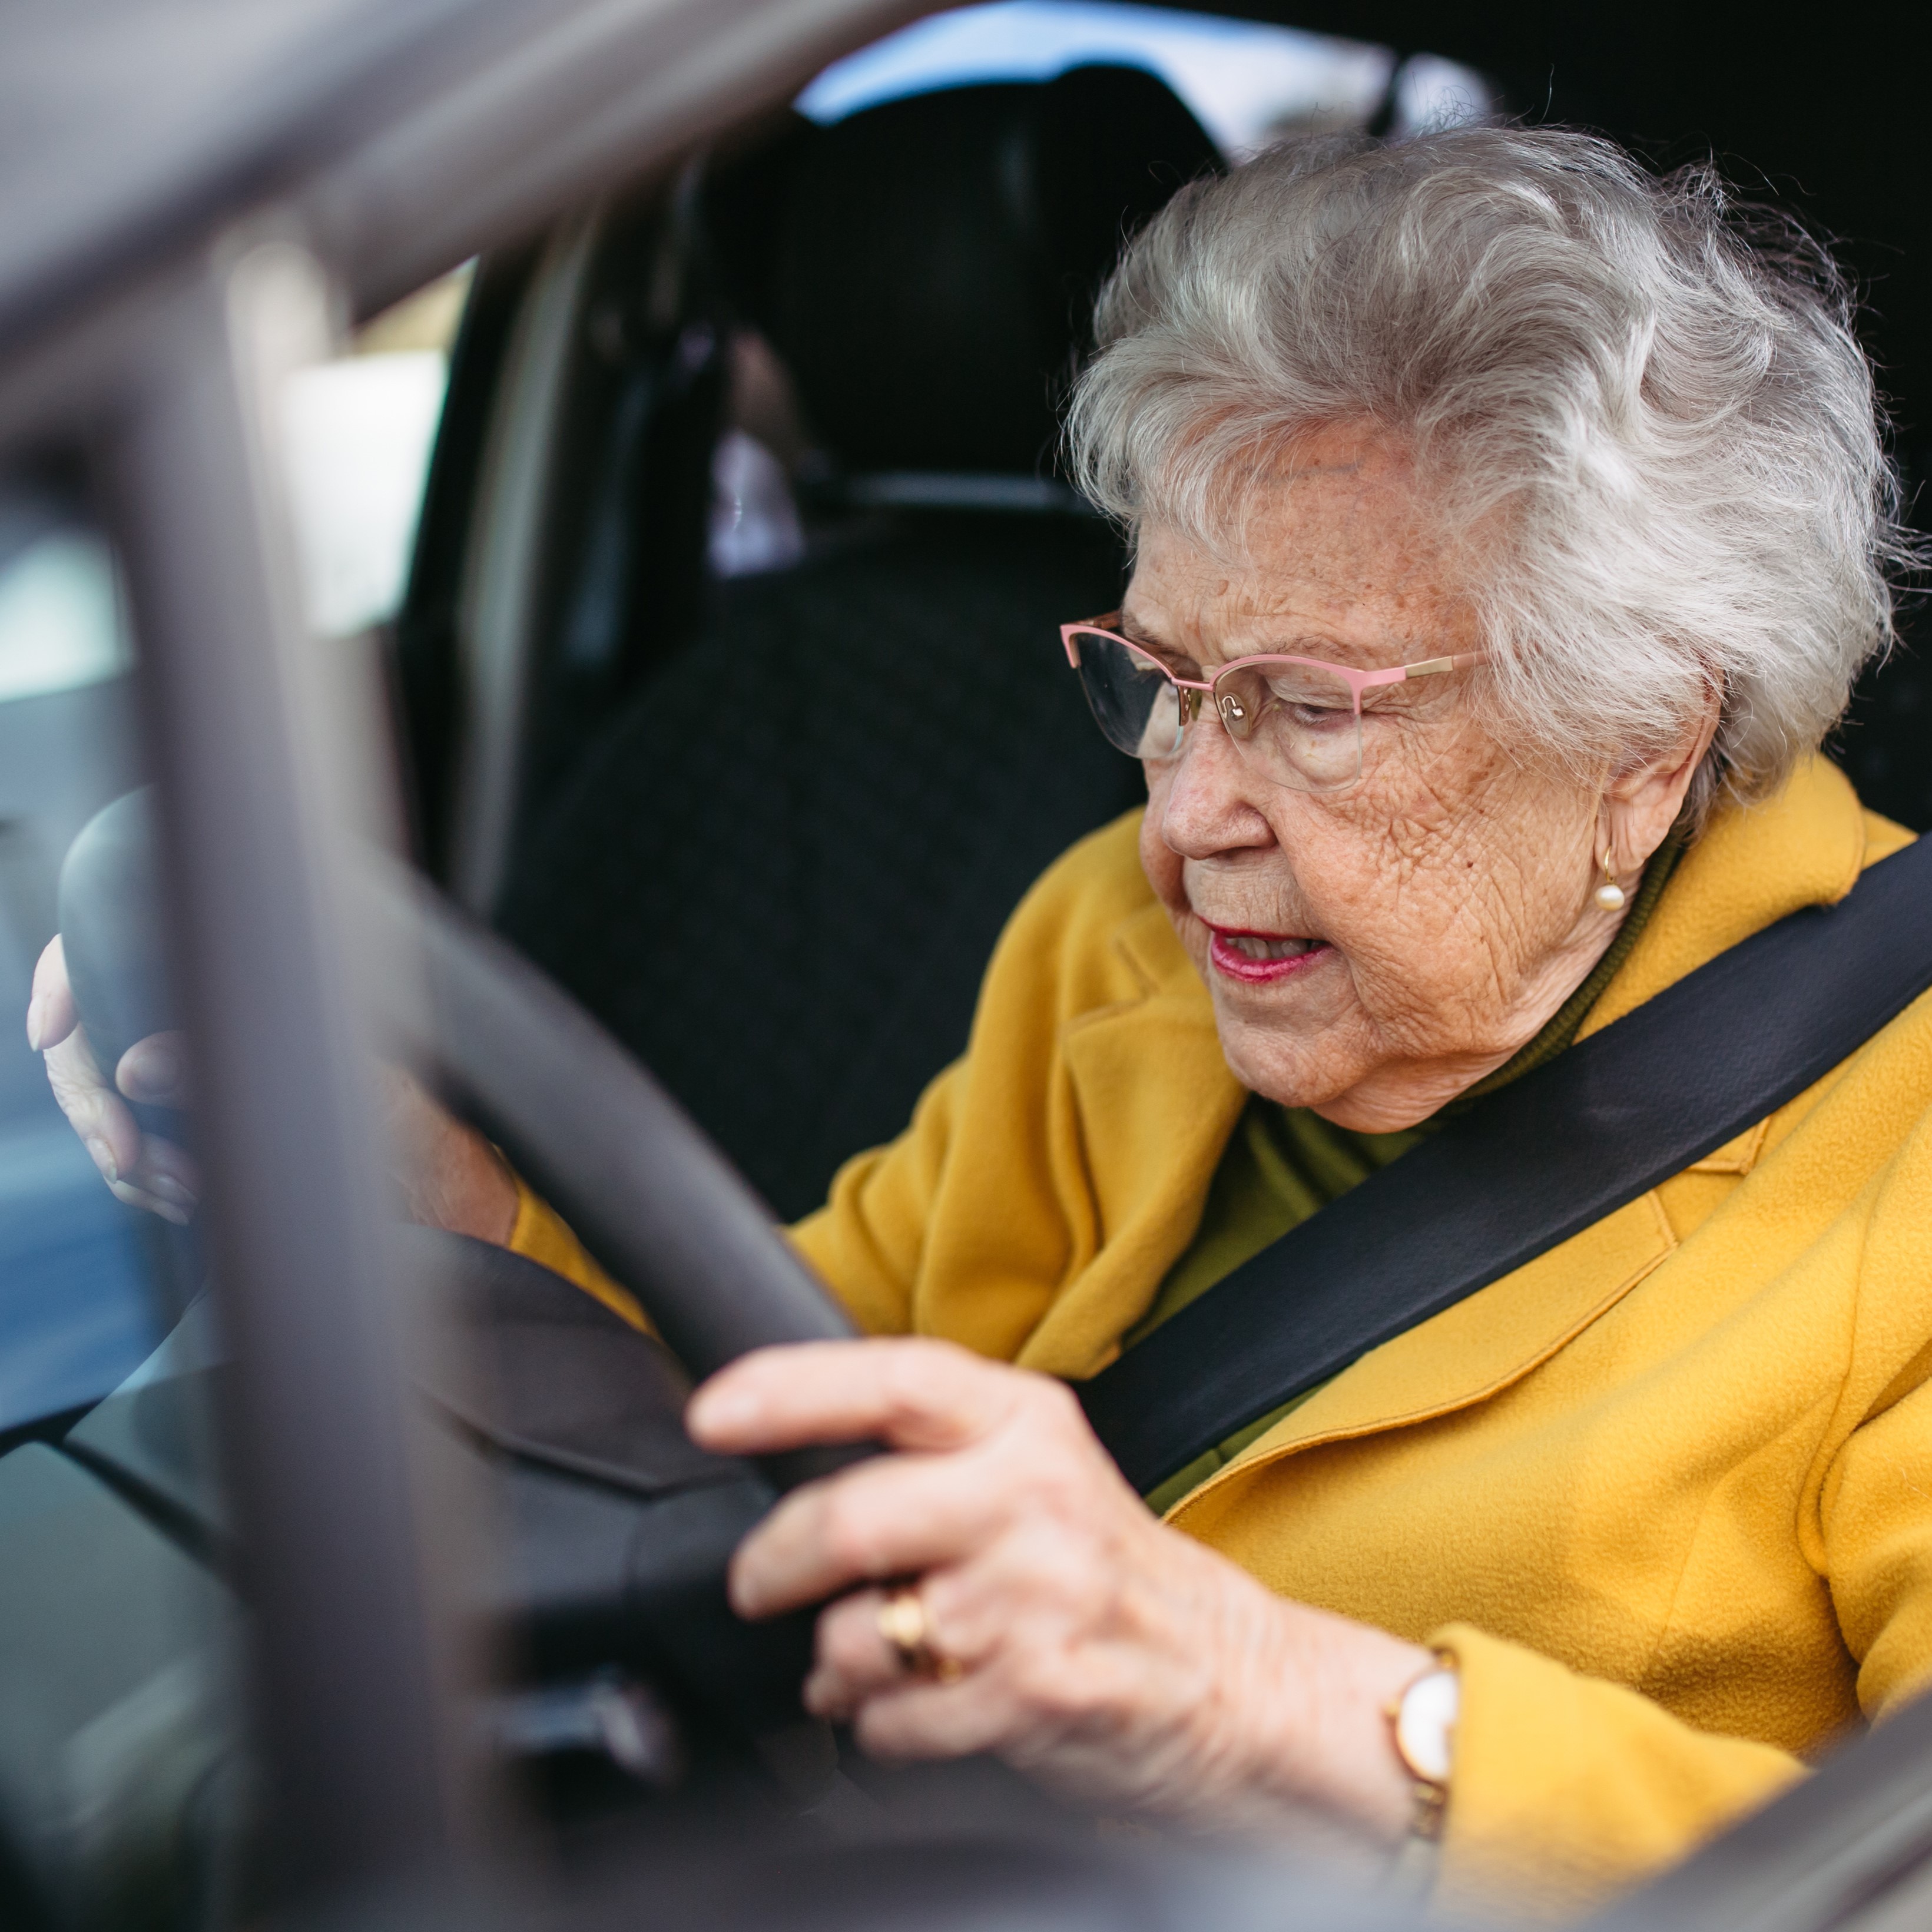 AAA promotes mobility and independence for older drivers